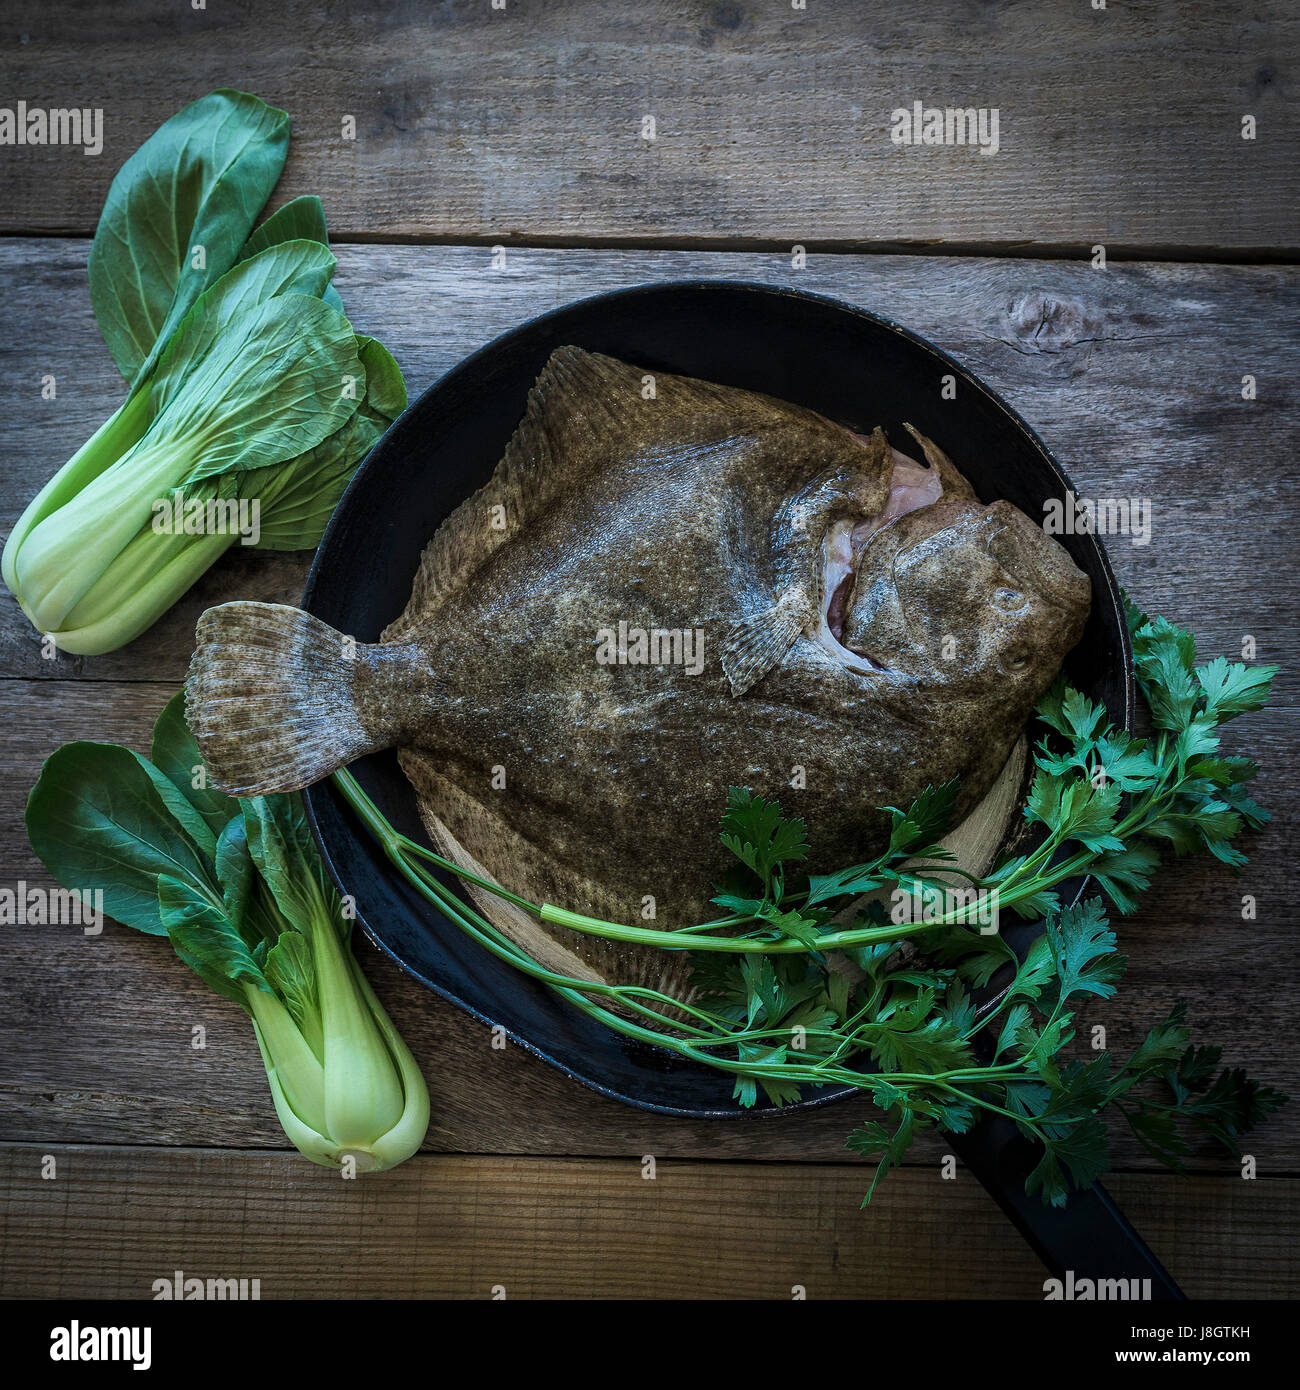 A turbot surrounded by baby vegetables; Food; Fish; Seafood; Flatfish; Ingredients for a meal; Uncooked; Raw; Healthy food; Fish dish Stock Photo